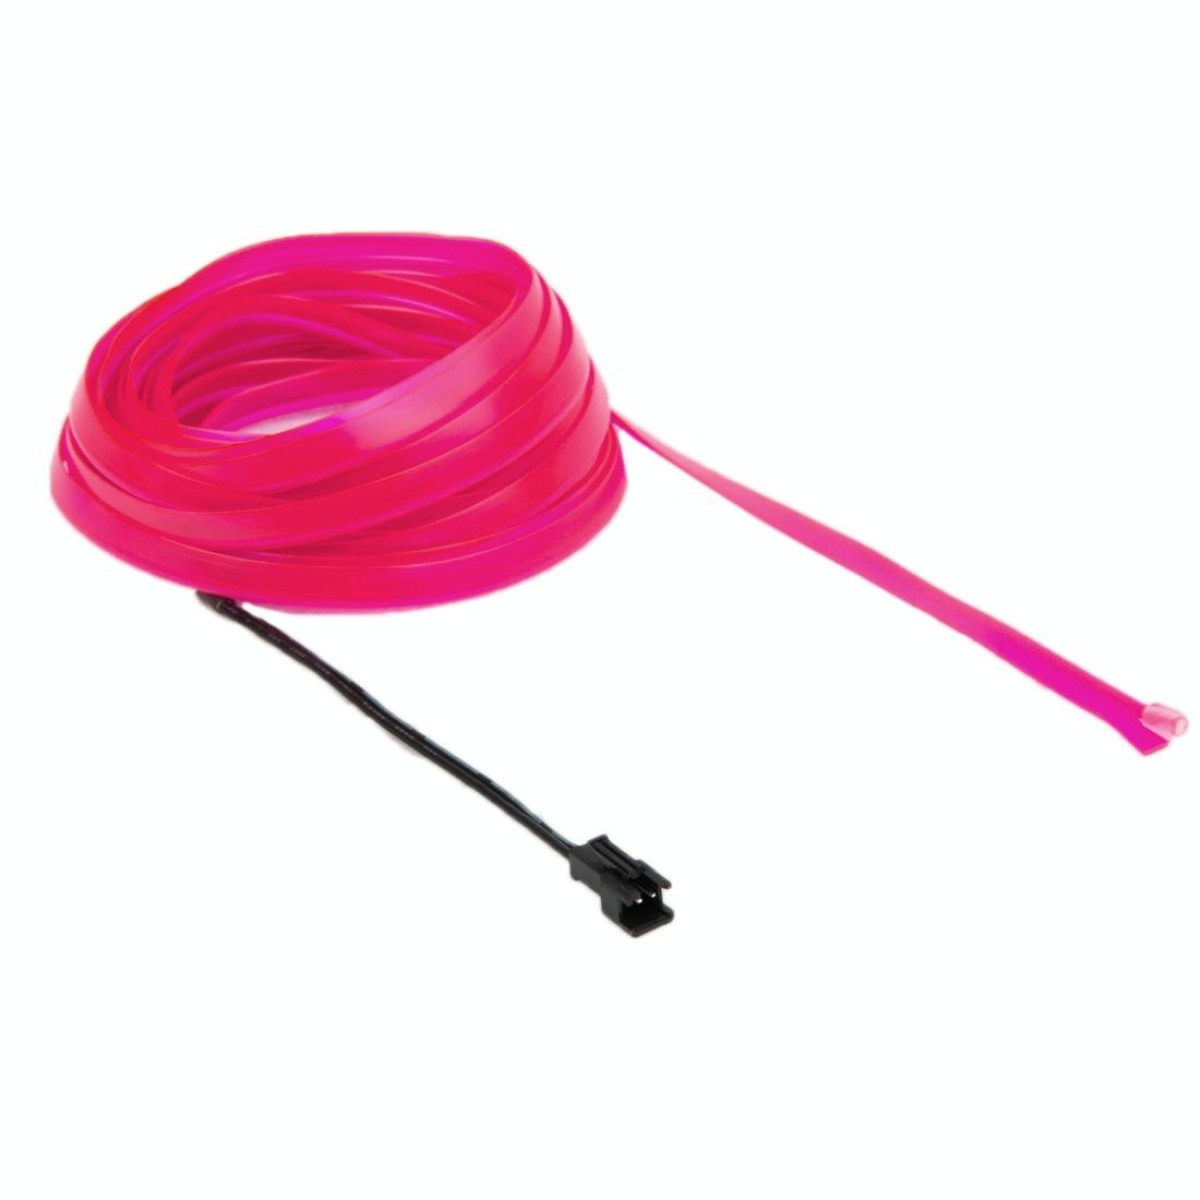 EL Cold Pink Light Waterproof Flat Flexible Car Strip Light with Driver for Car Decoration, Length: 5m(Pink)